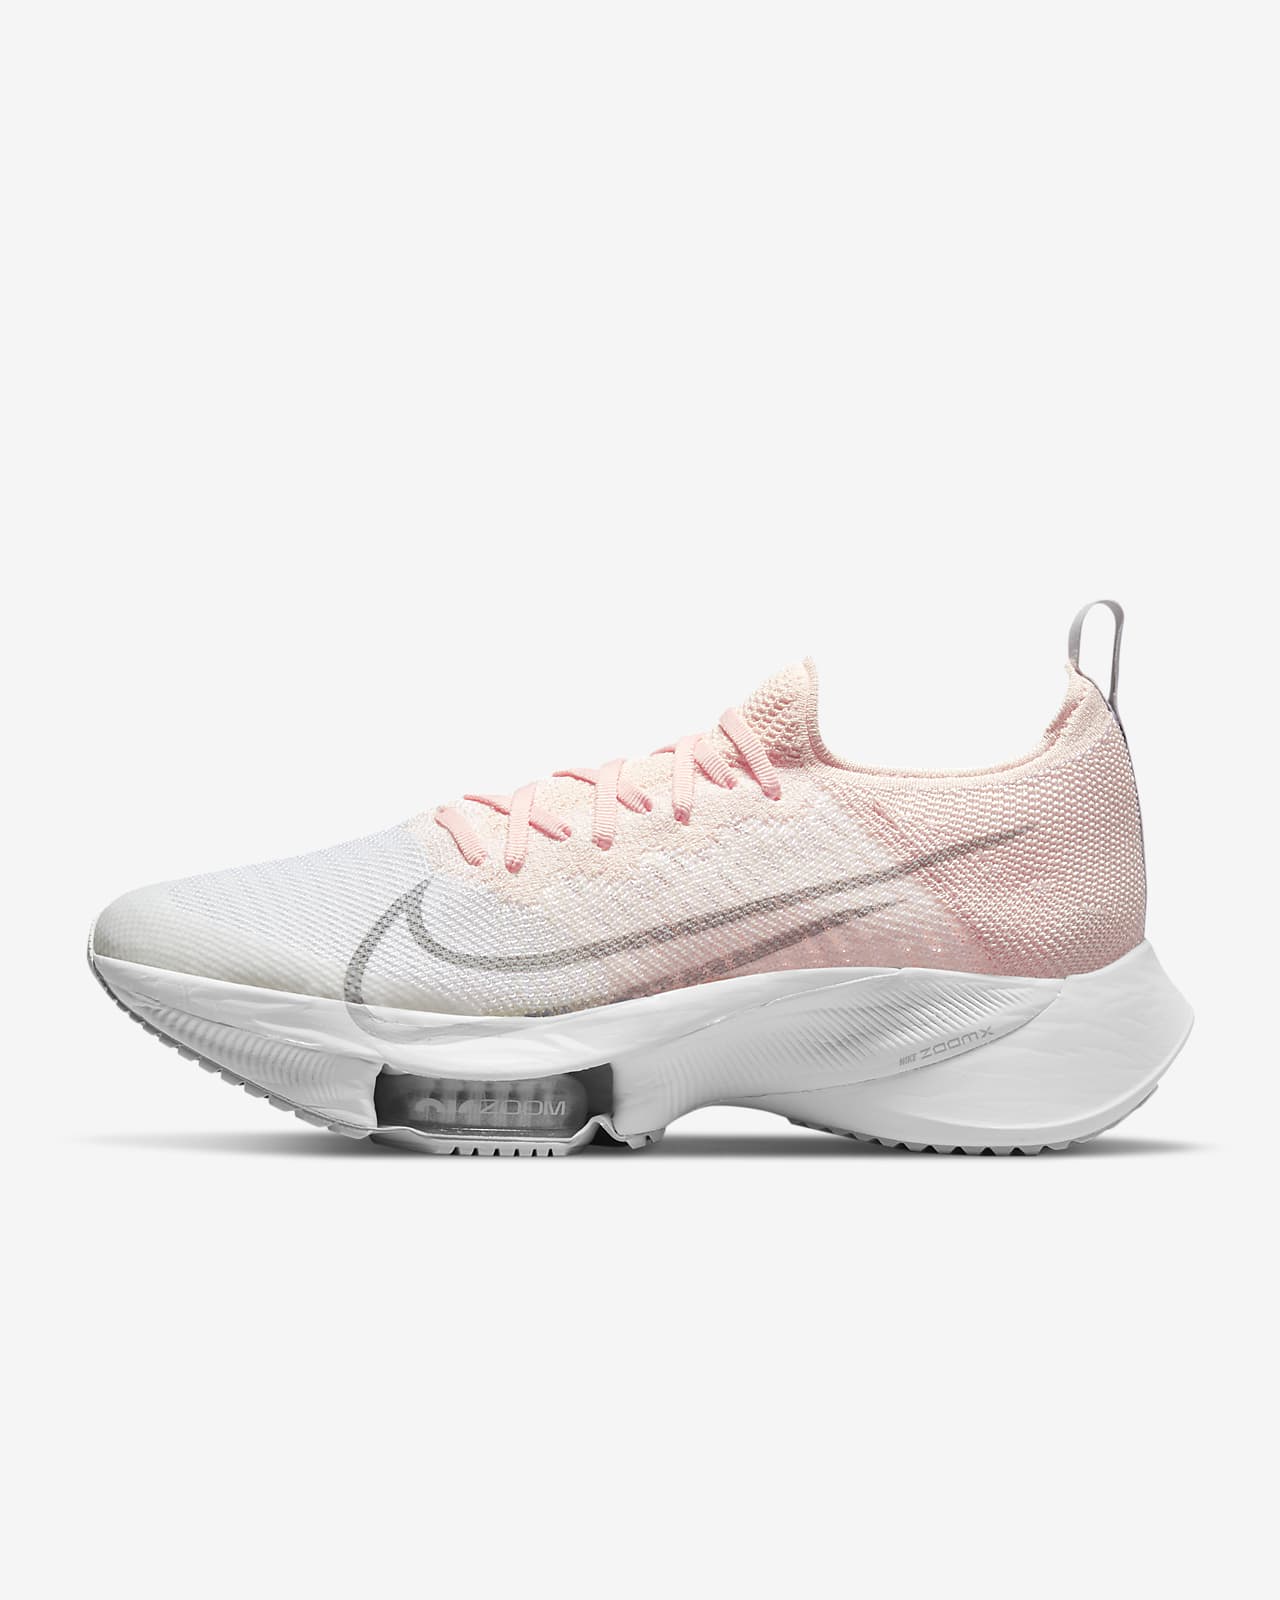 New Nike Air Max 270 Running Shoes Athletic Casual Gym Light Soft Pink  SIZES 🔥 | eBay